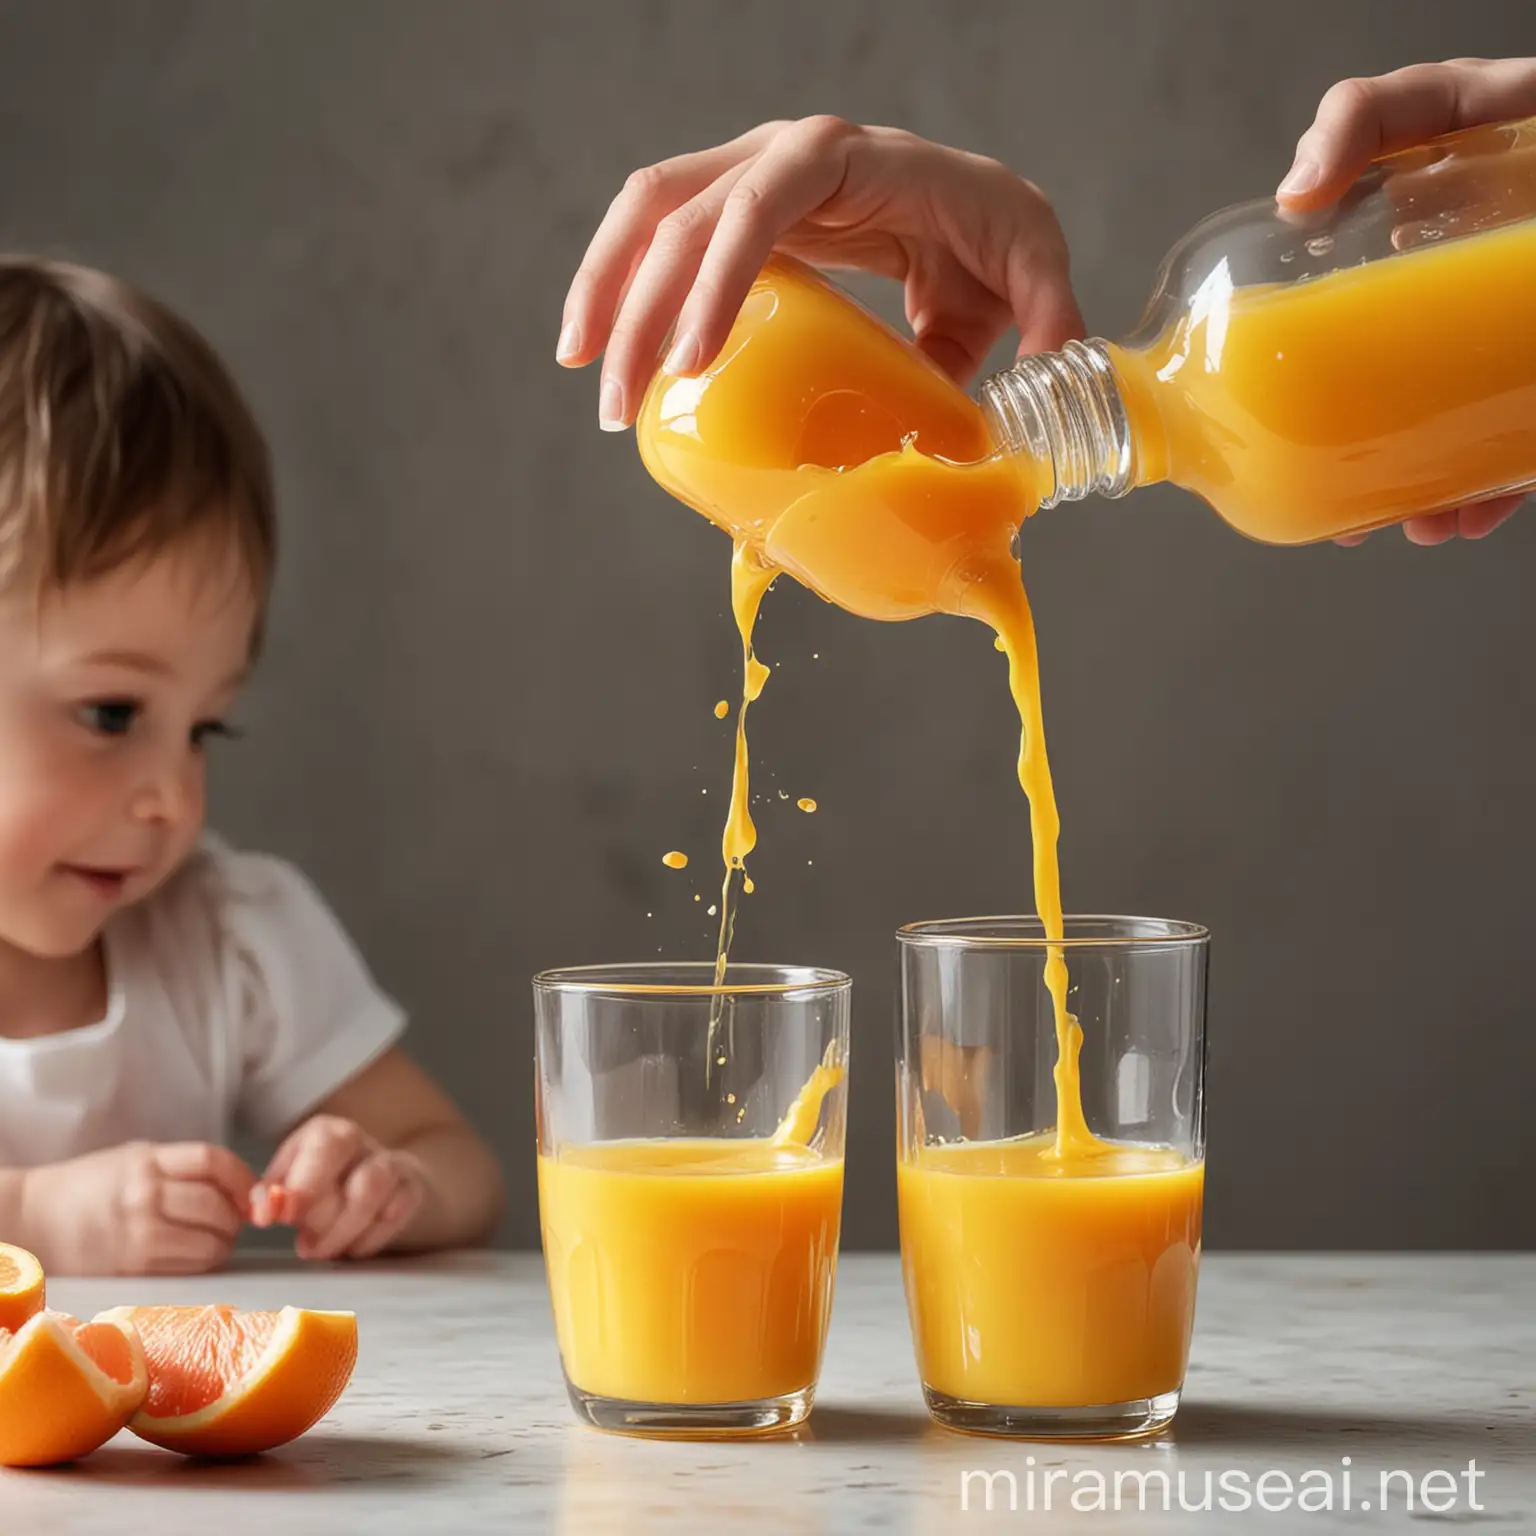 Mother Pouring Juice into Childs Glass